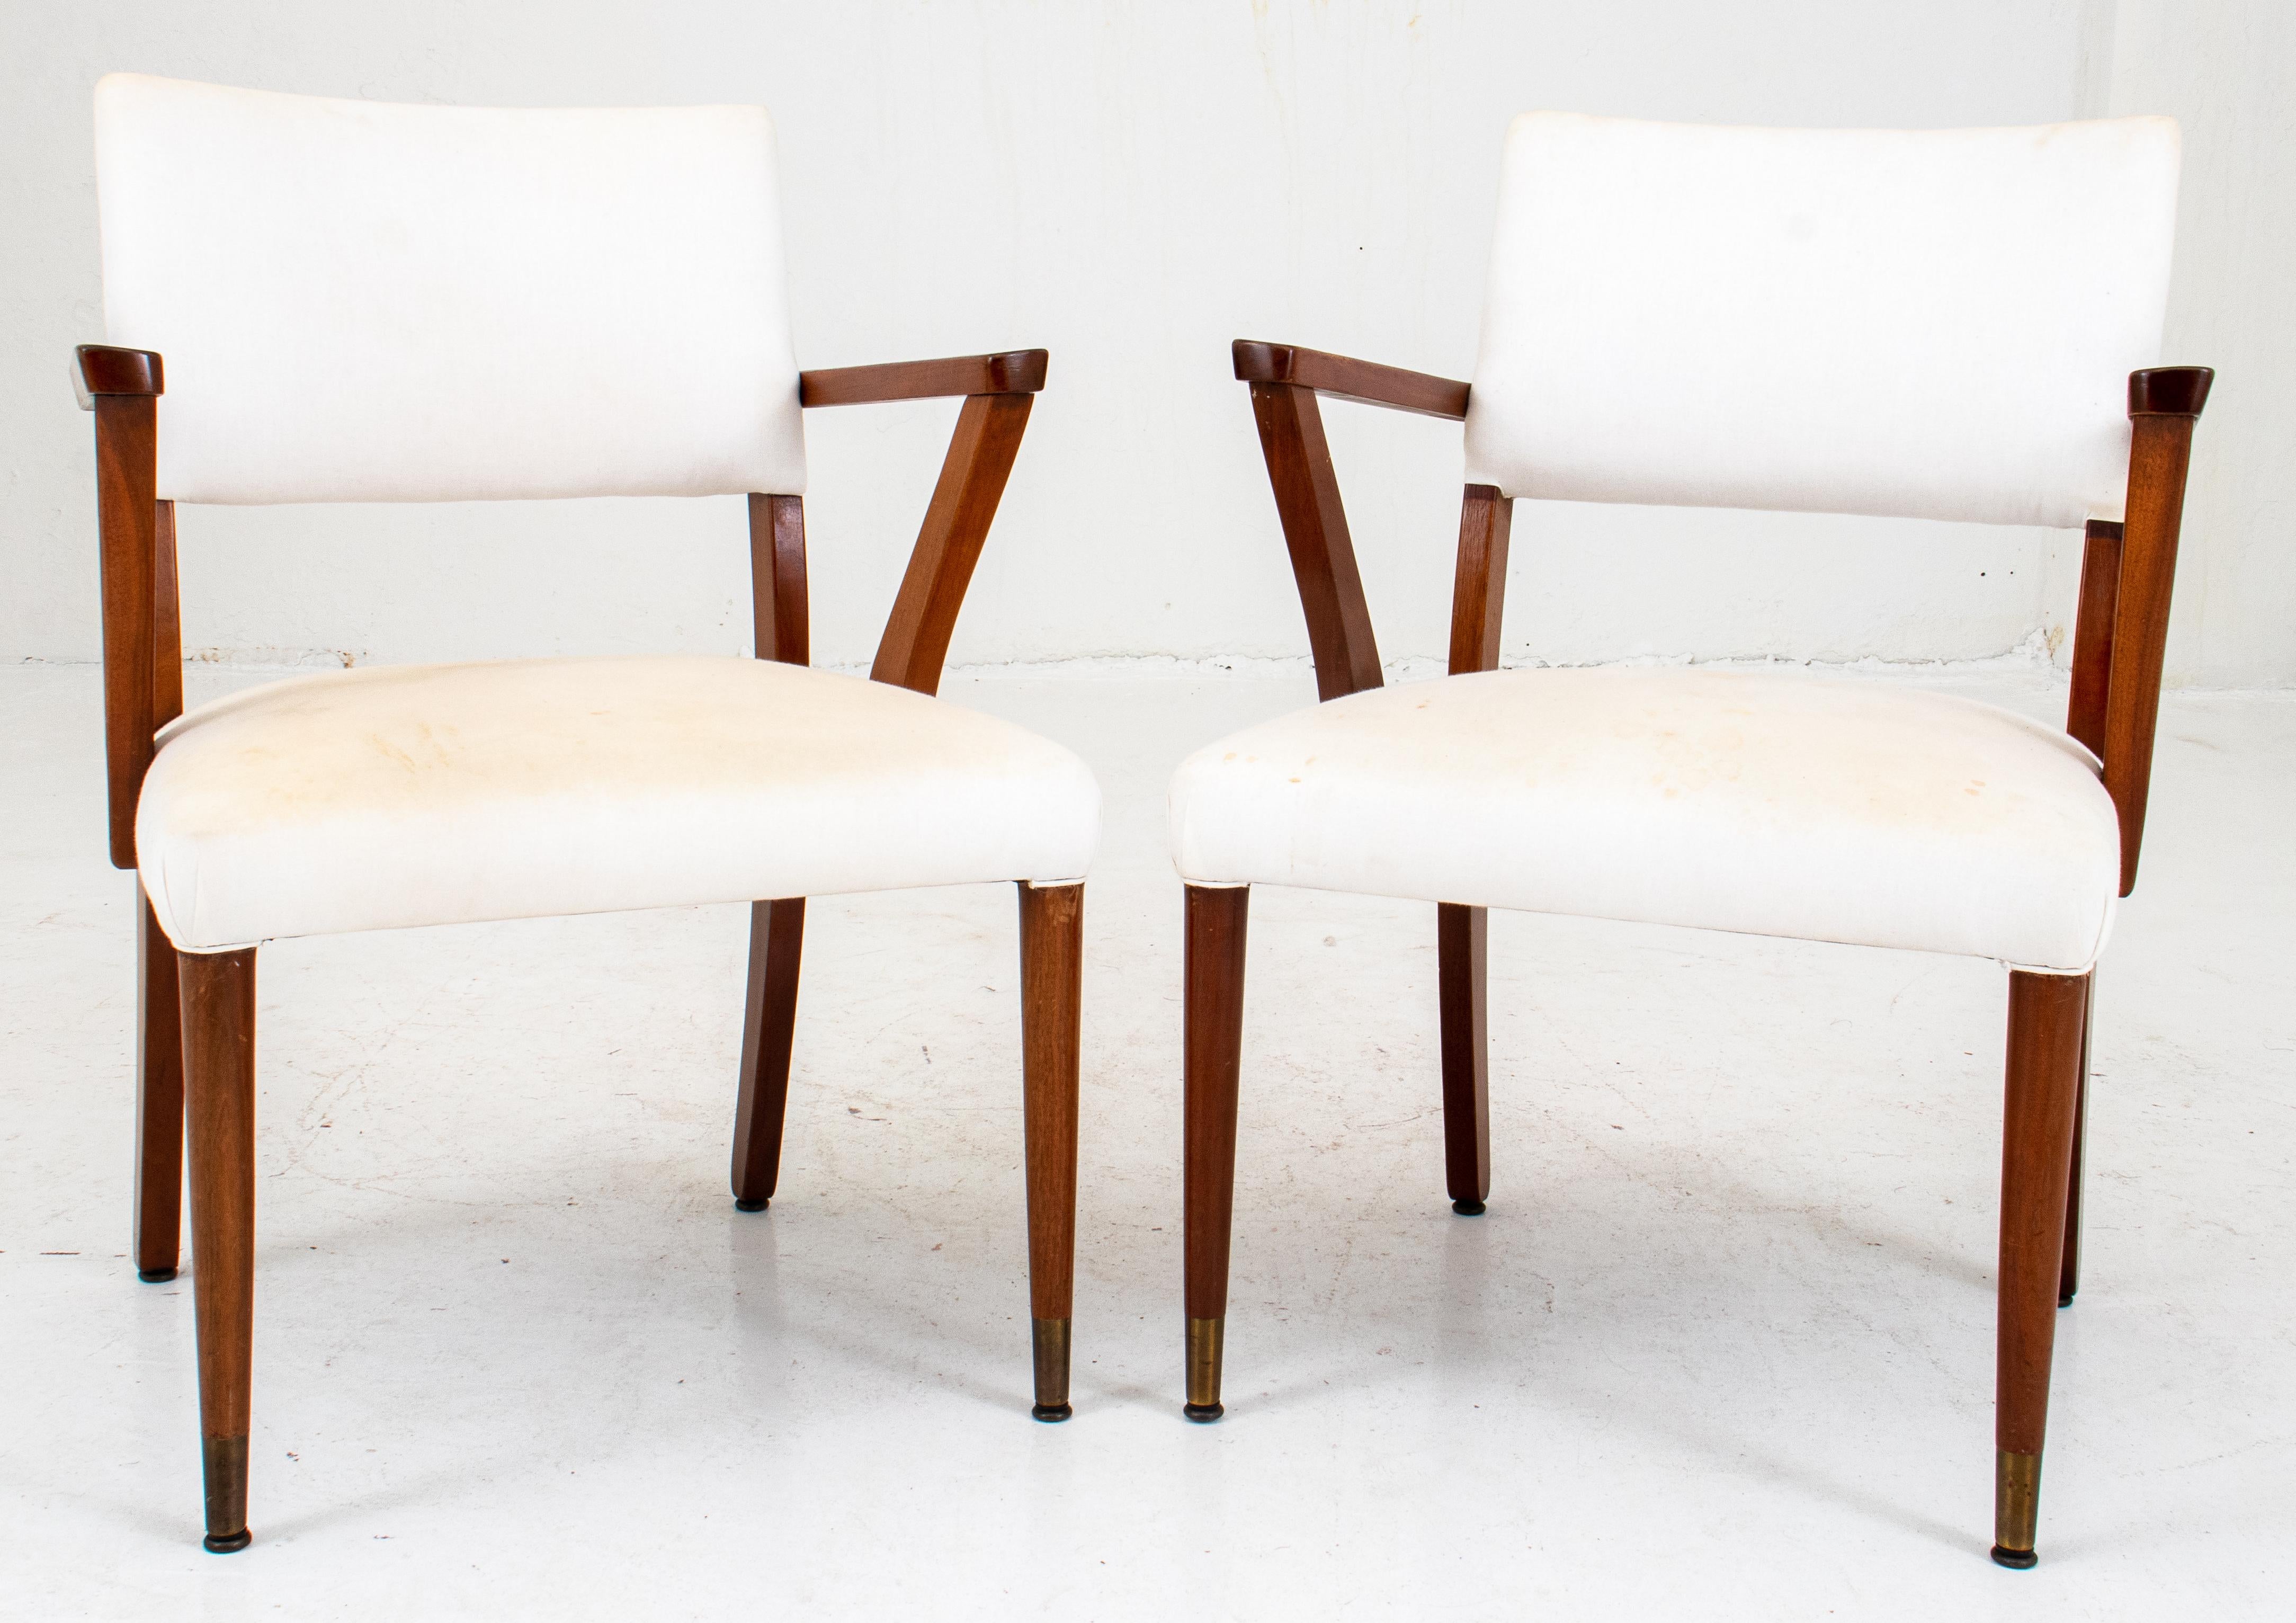 Pair of Mid-Century Modern hardwood armchairs with white cloth upholstery, front legs with brass feet. 33